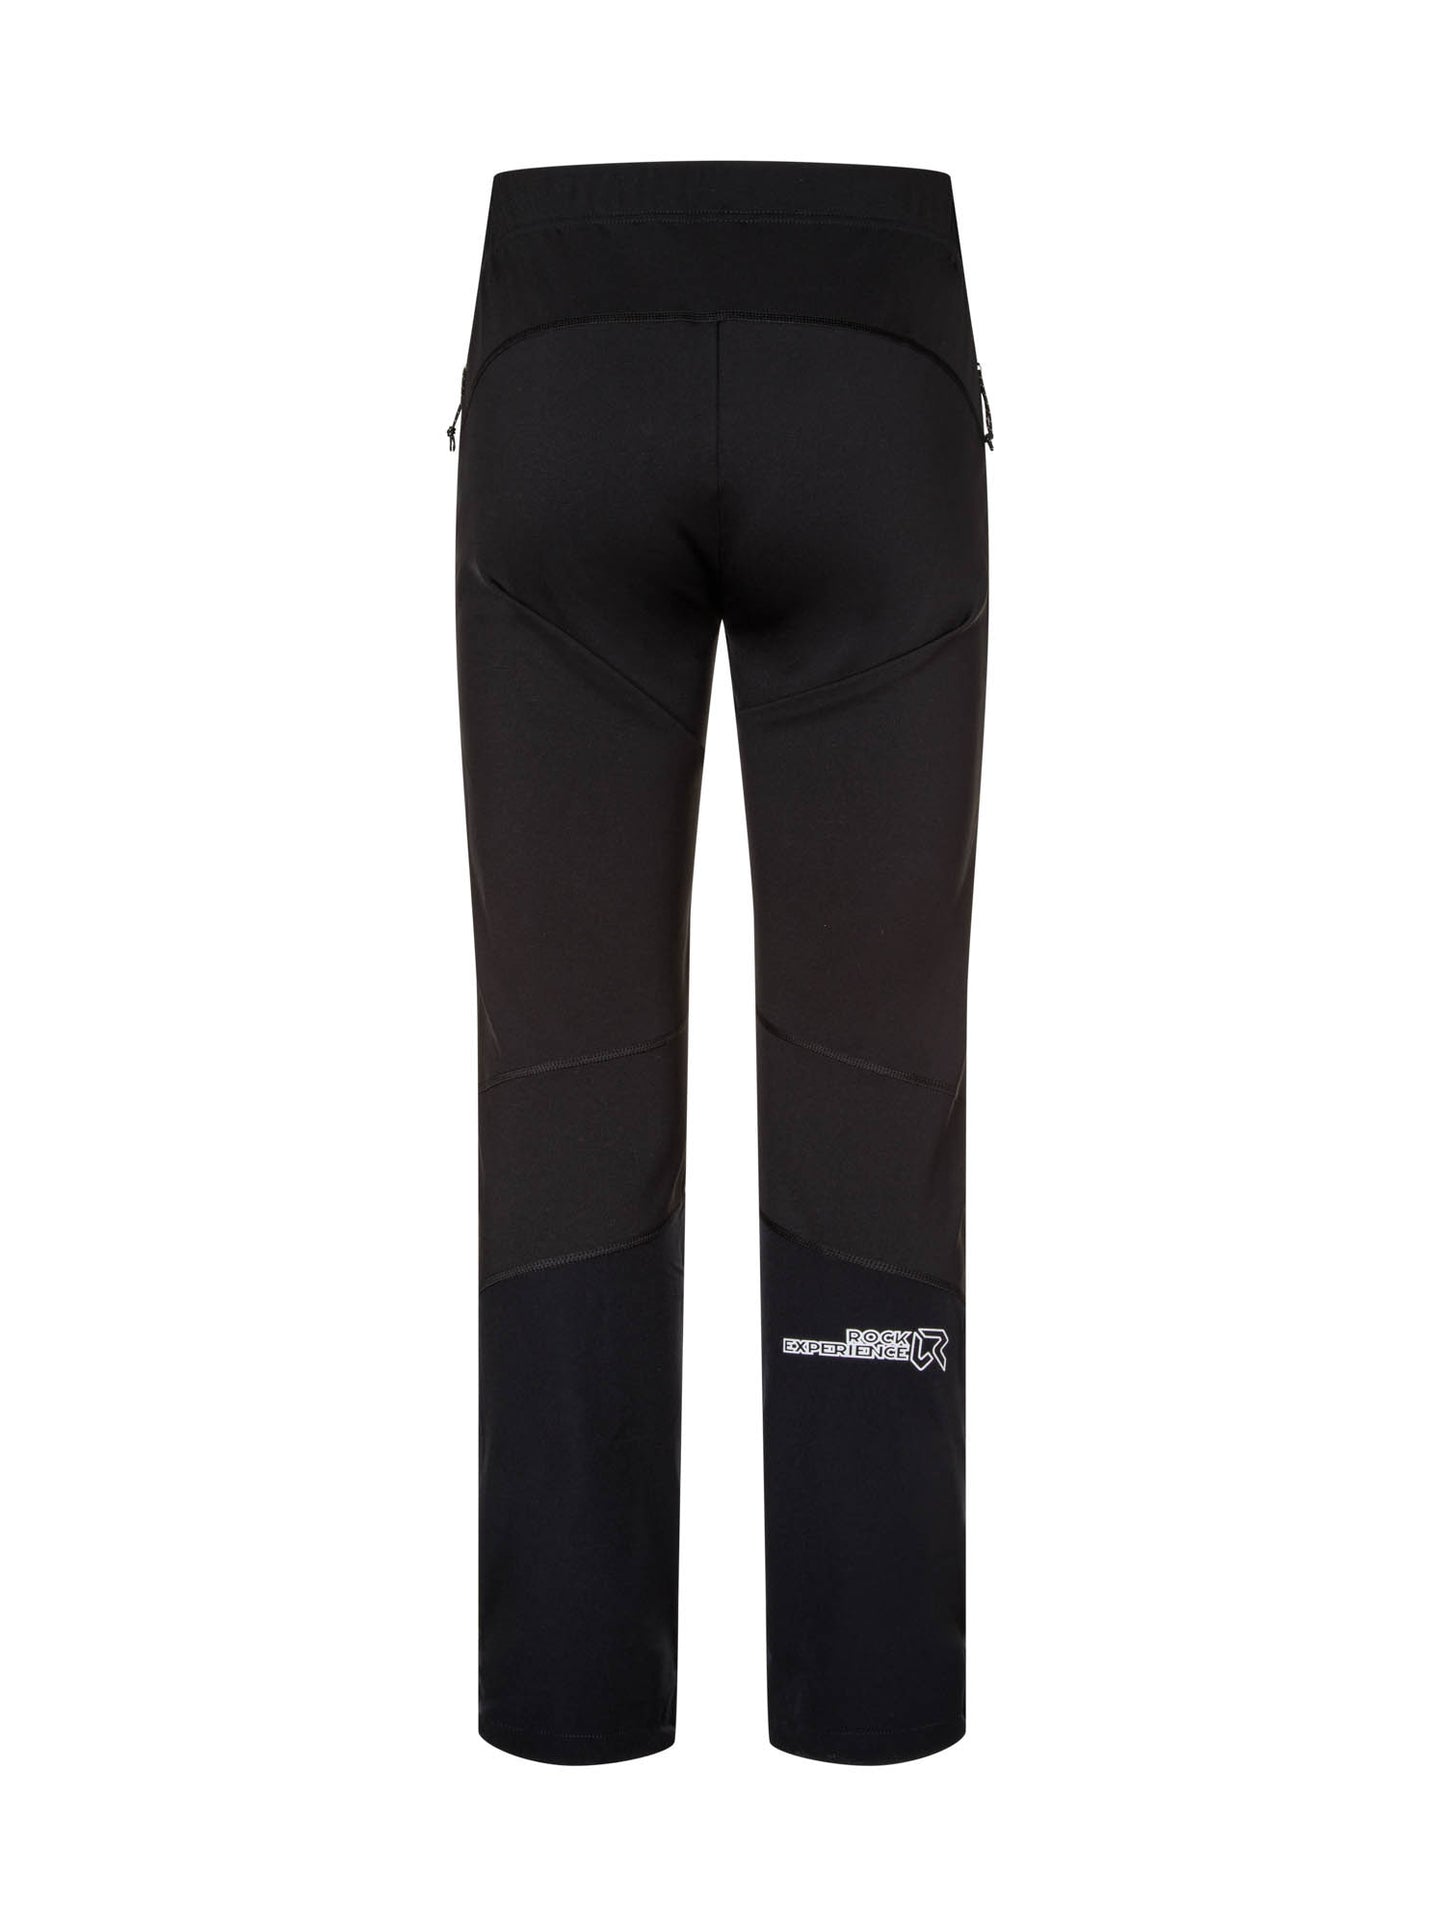 SHIELD ROOF WOMAN PANT